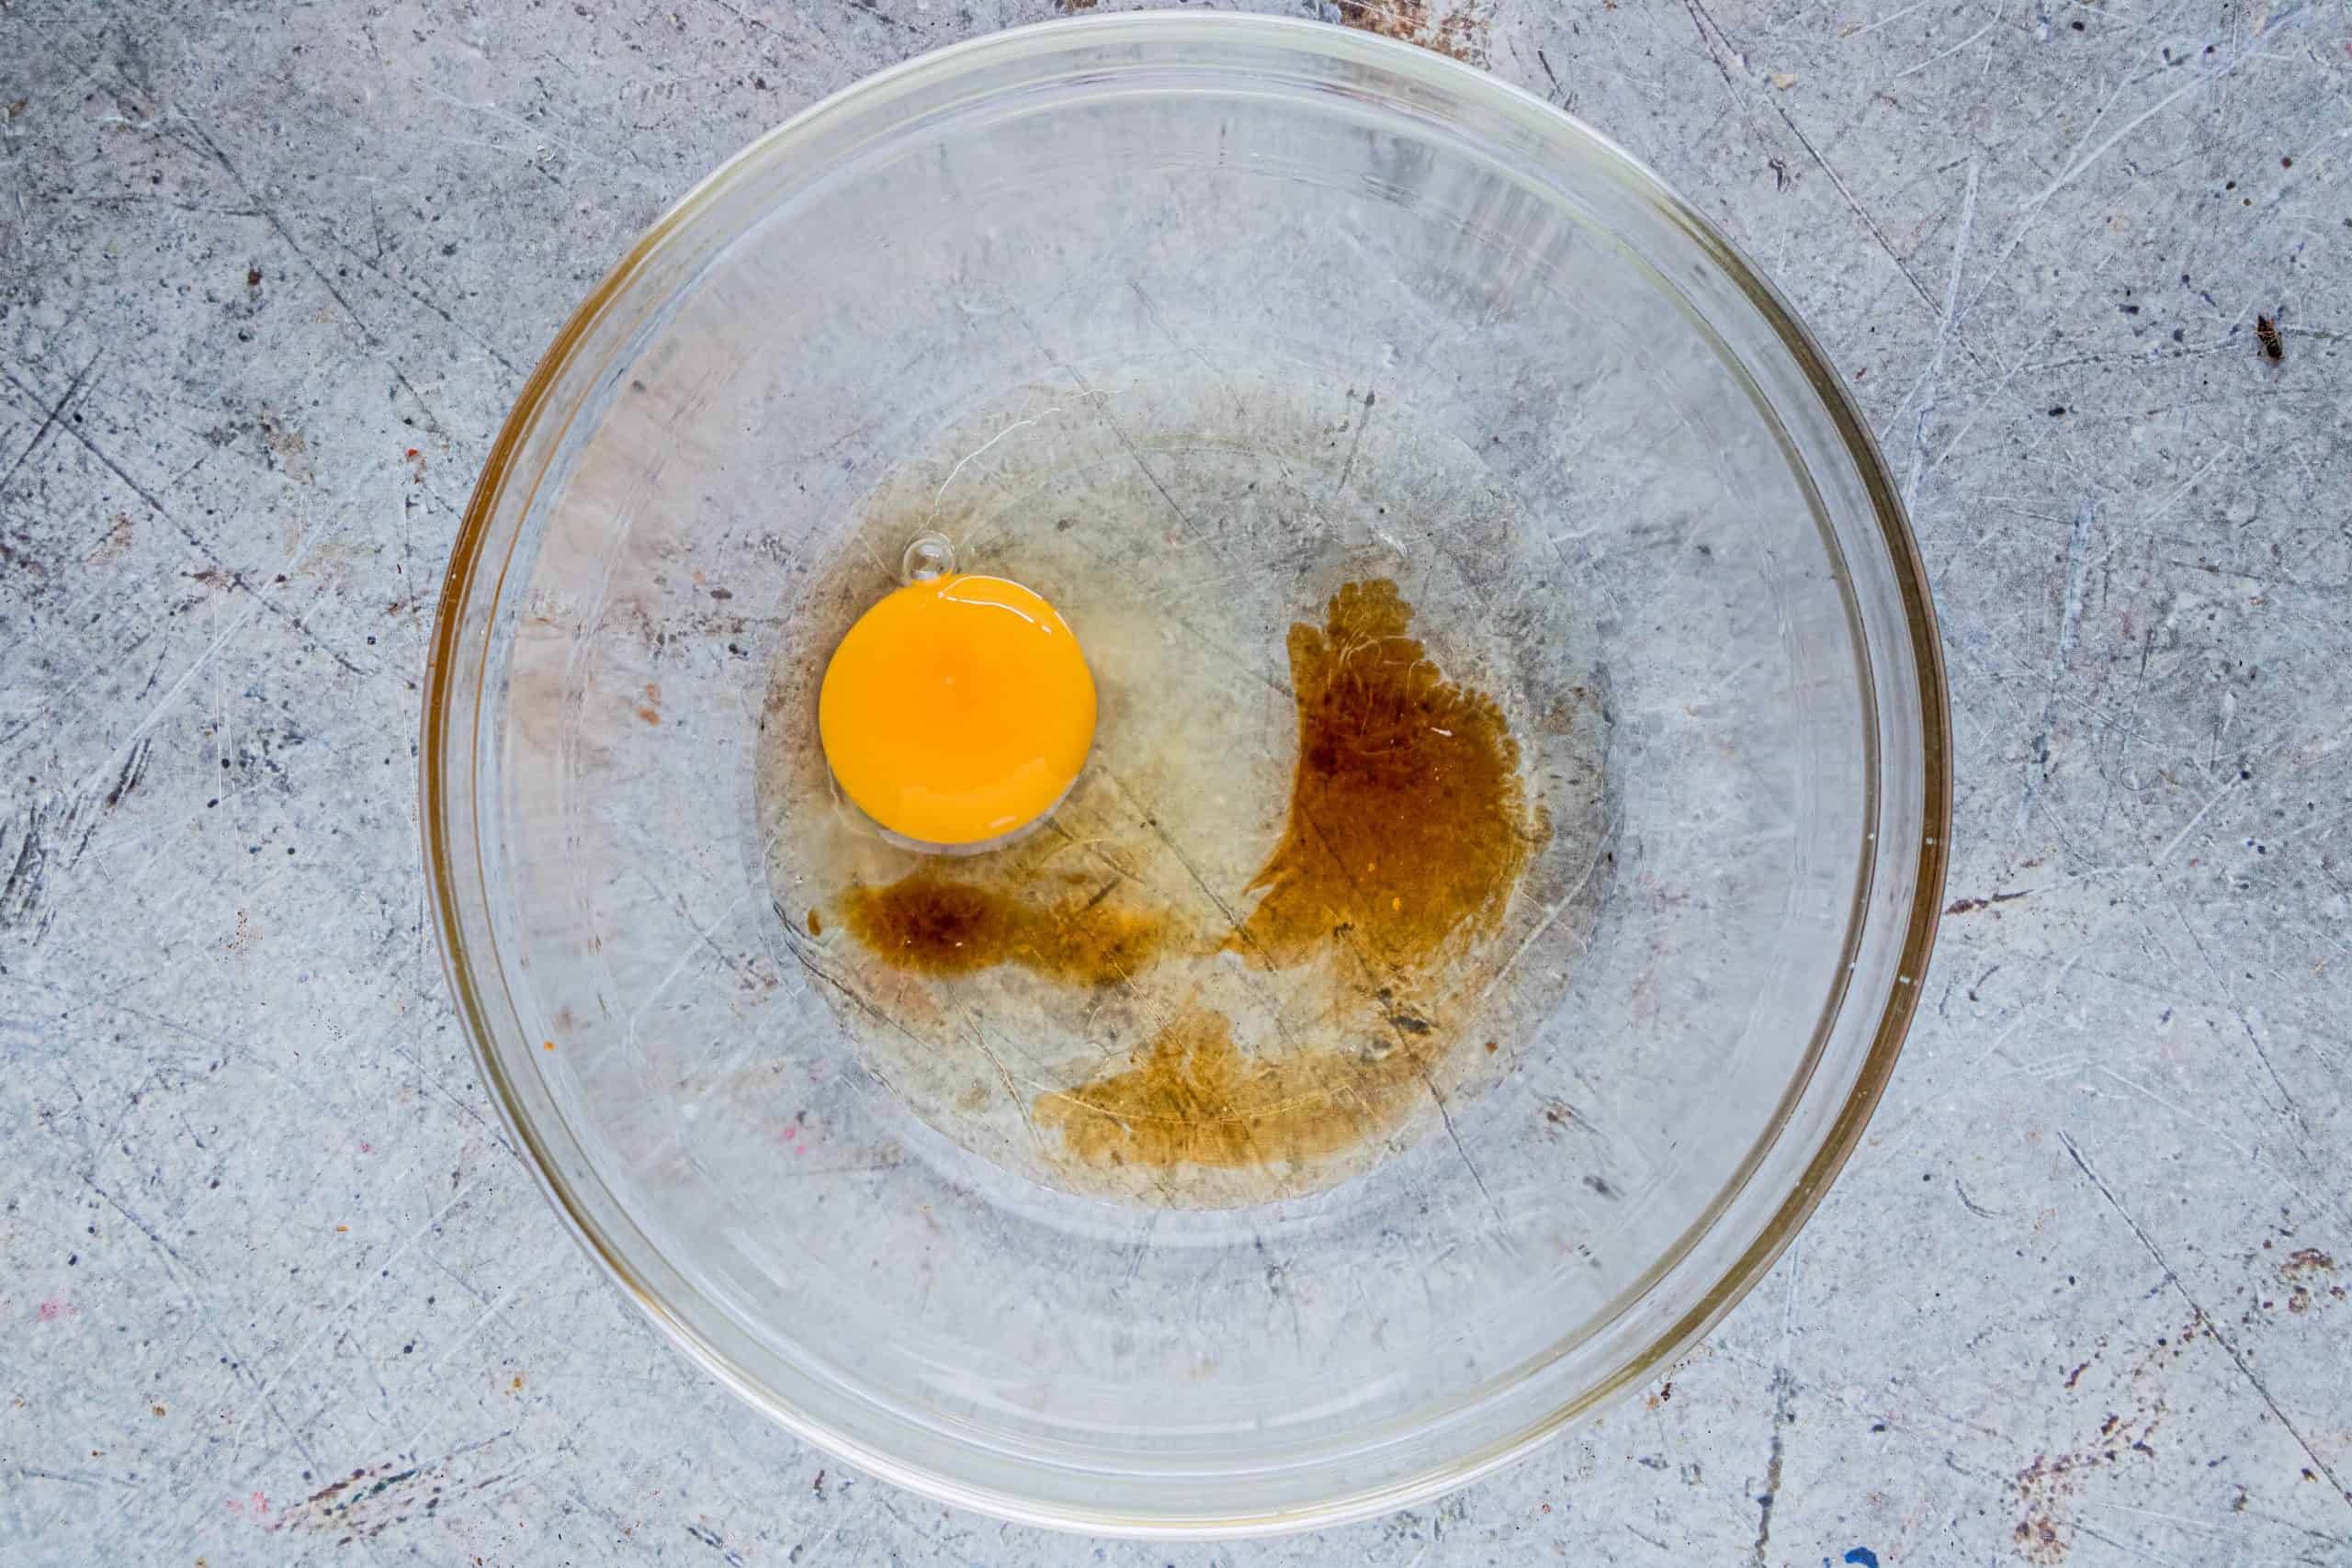 egg, corn syrup and vanilla extract in a clear glass bowl